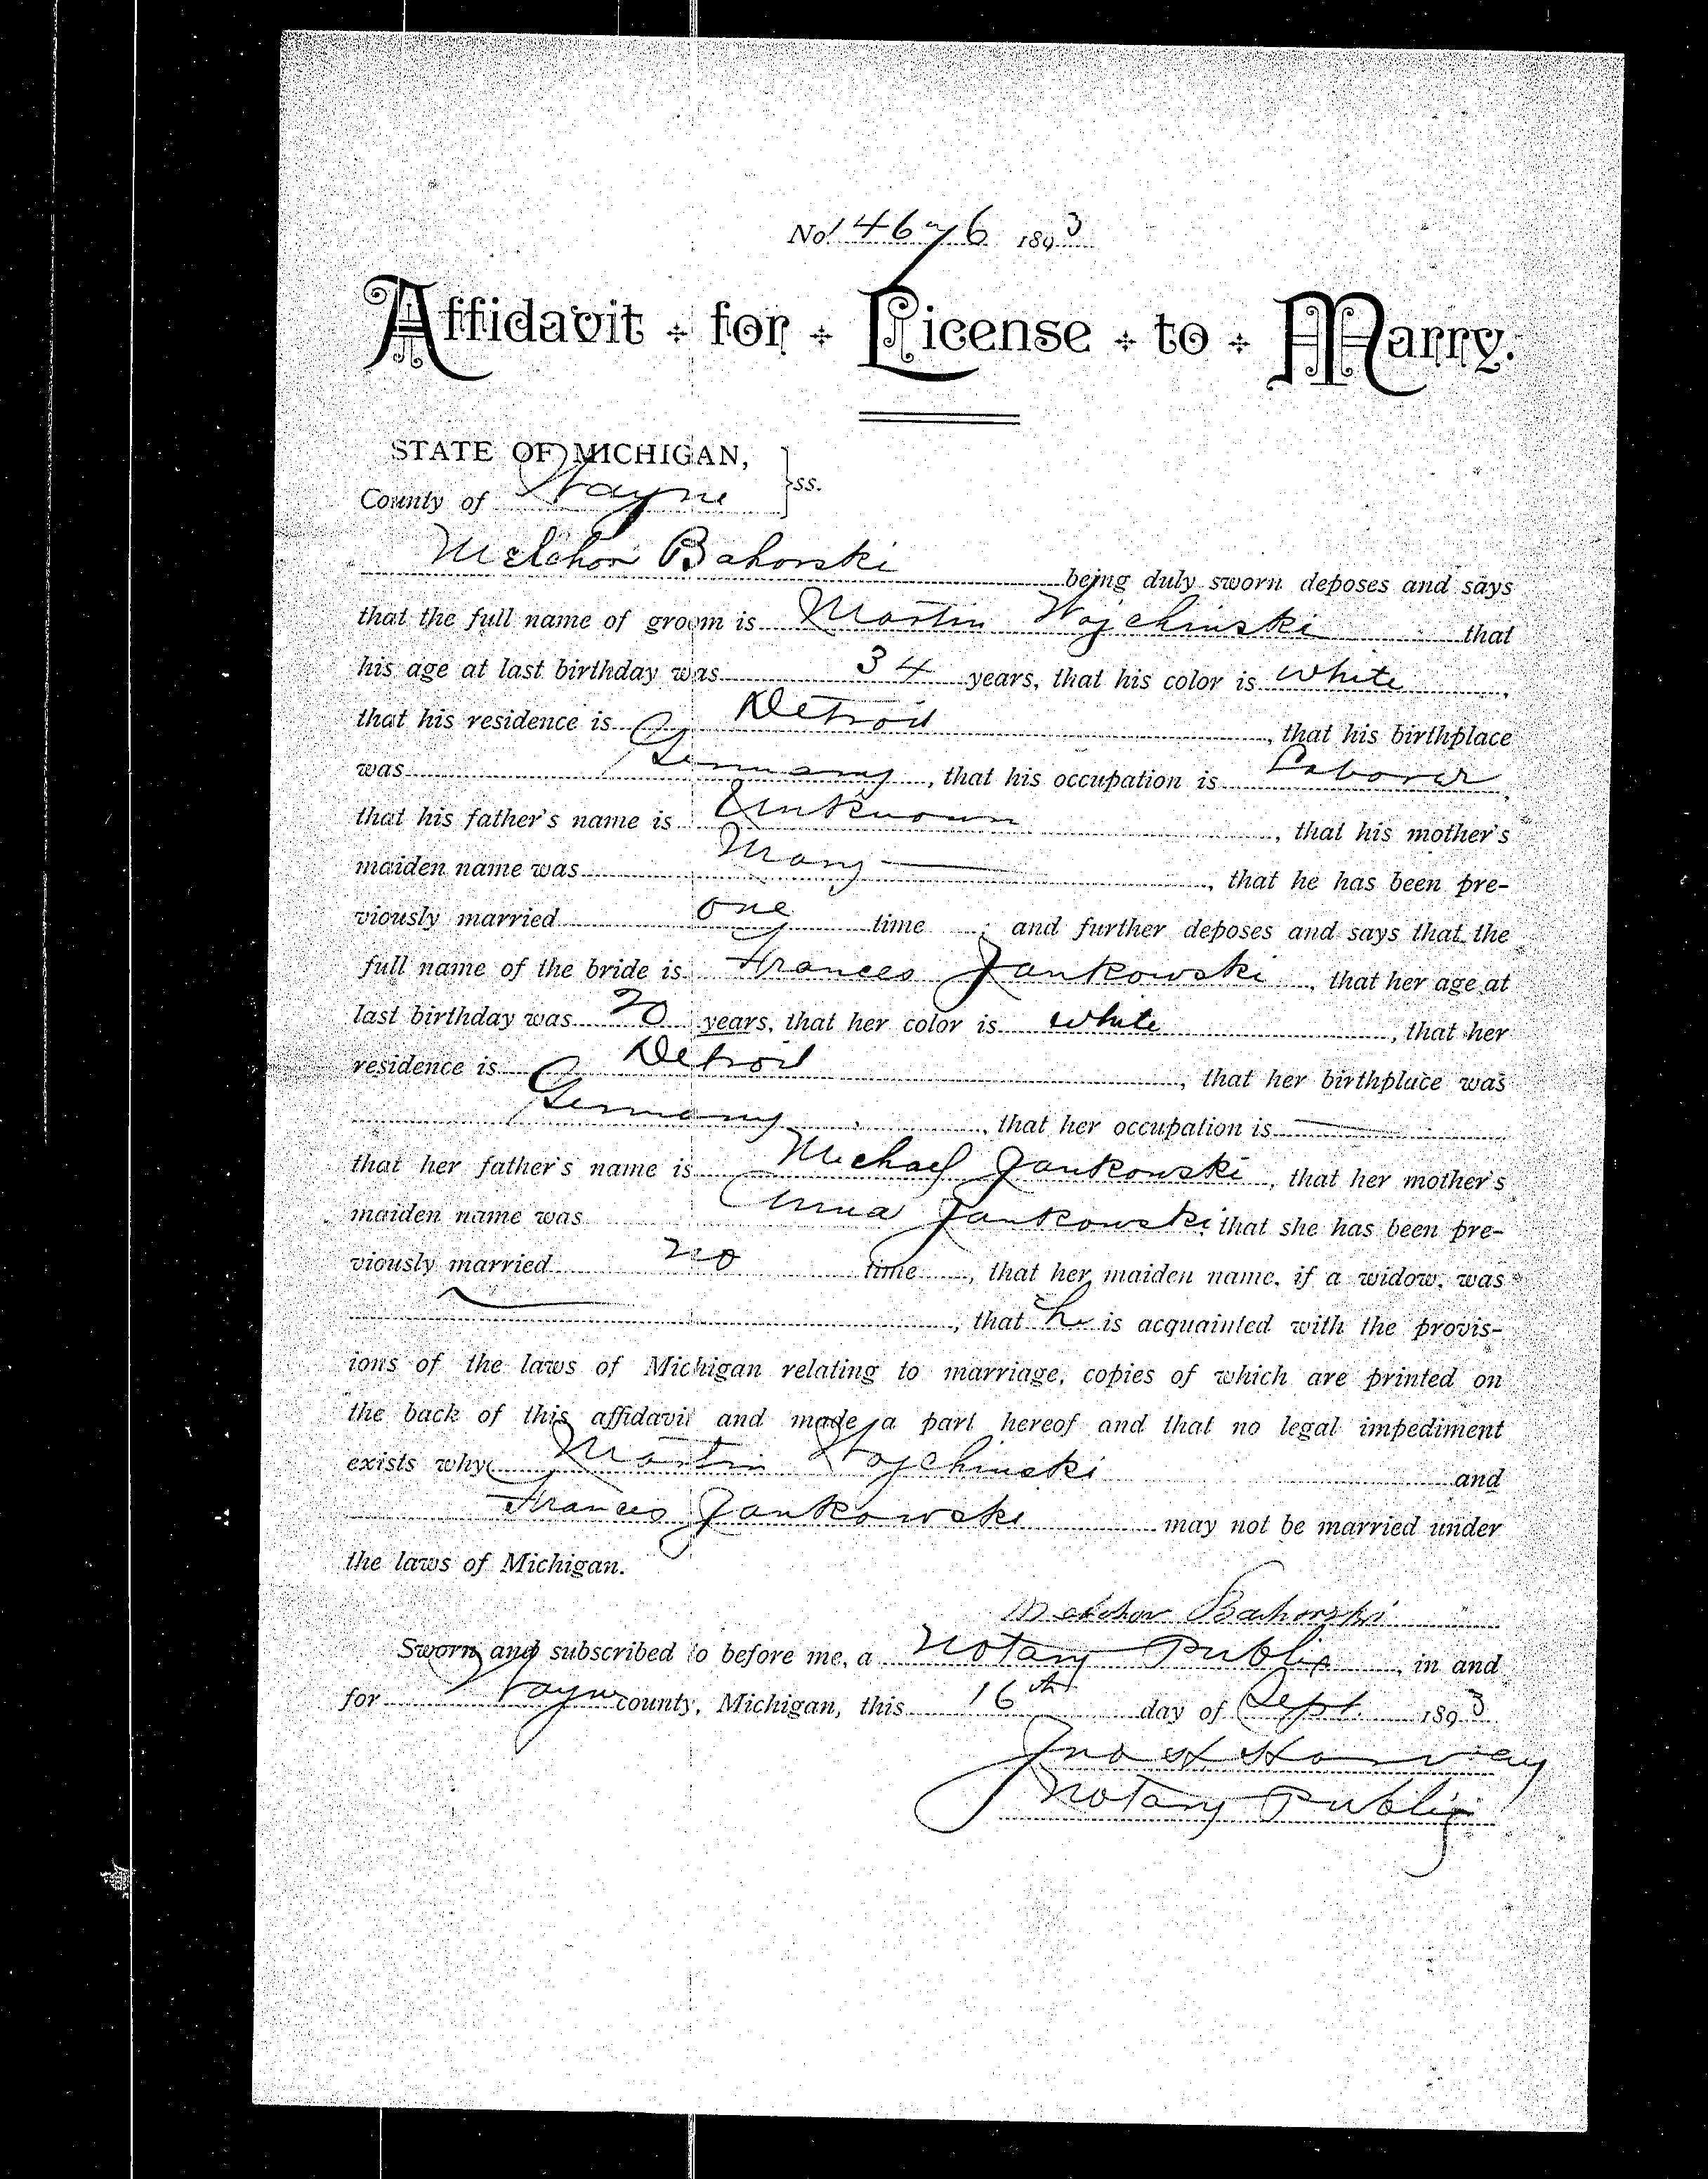 1893 martin and frances marriage license